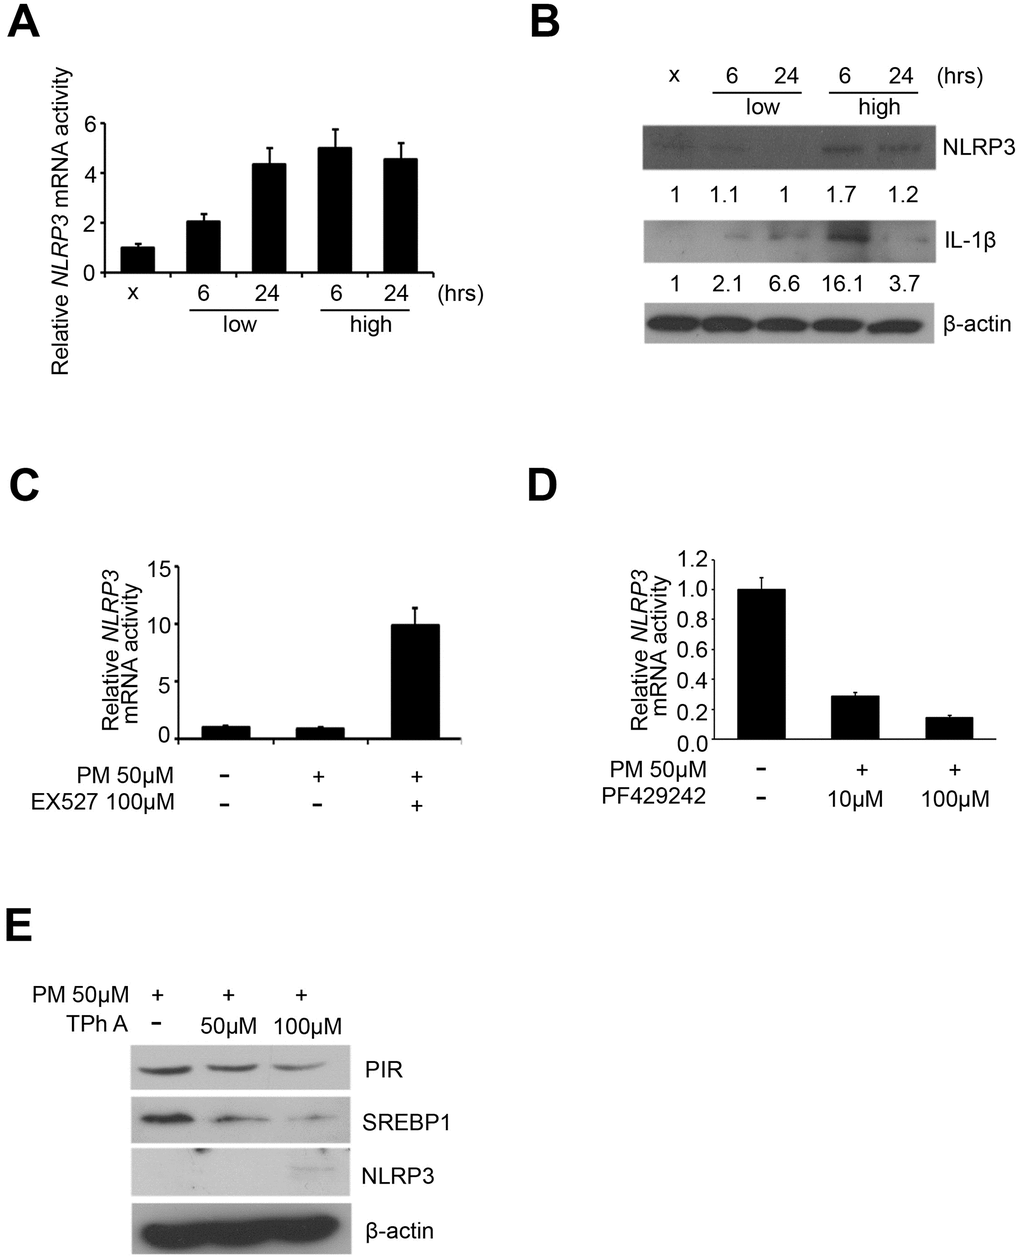 NLRP3 inflammasome was upregulated by PM exposure. (A) mRNA level of NLRP3 after PM in HPF. (B) Western blot analysis of NLRP3 and IL-1β after PM in HPF. (C) mRNA level of NLRP3 in Ex527-PM co-treated HPF models. (D) mRNA levels of NLRP3 in PF429242-PM co-treated HPF models. (E) Western blot analysis of PIR, SREBP1, and NLRP3 in TPh A-PM co-treated HPF models.